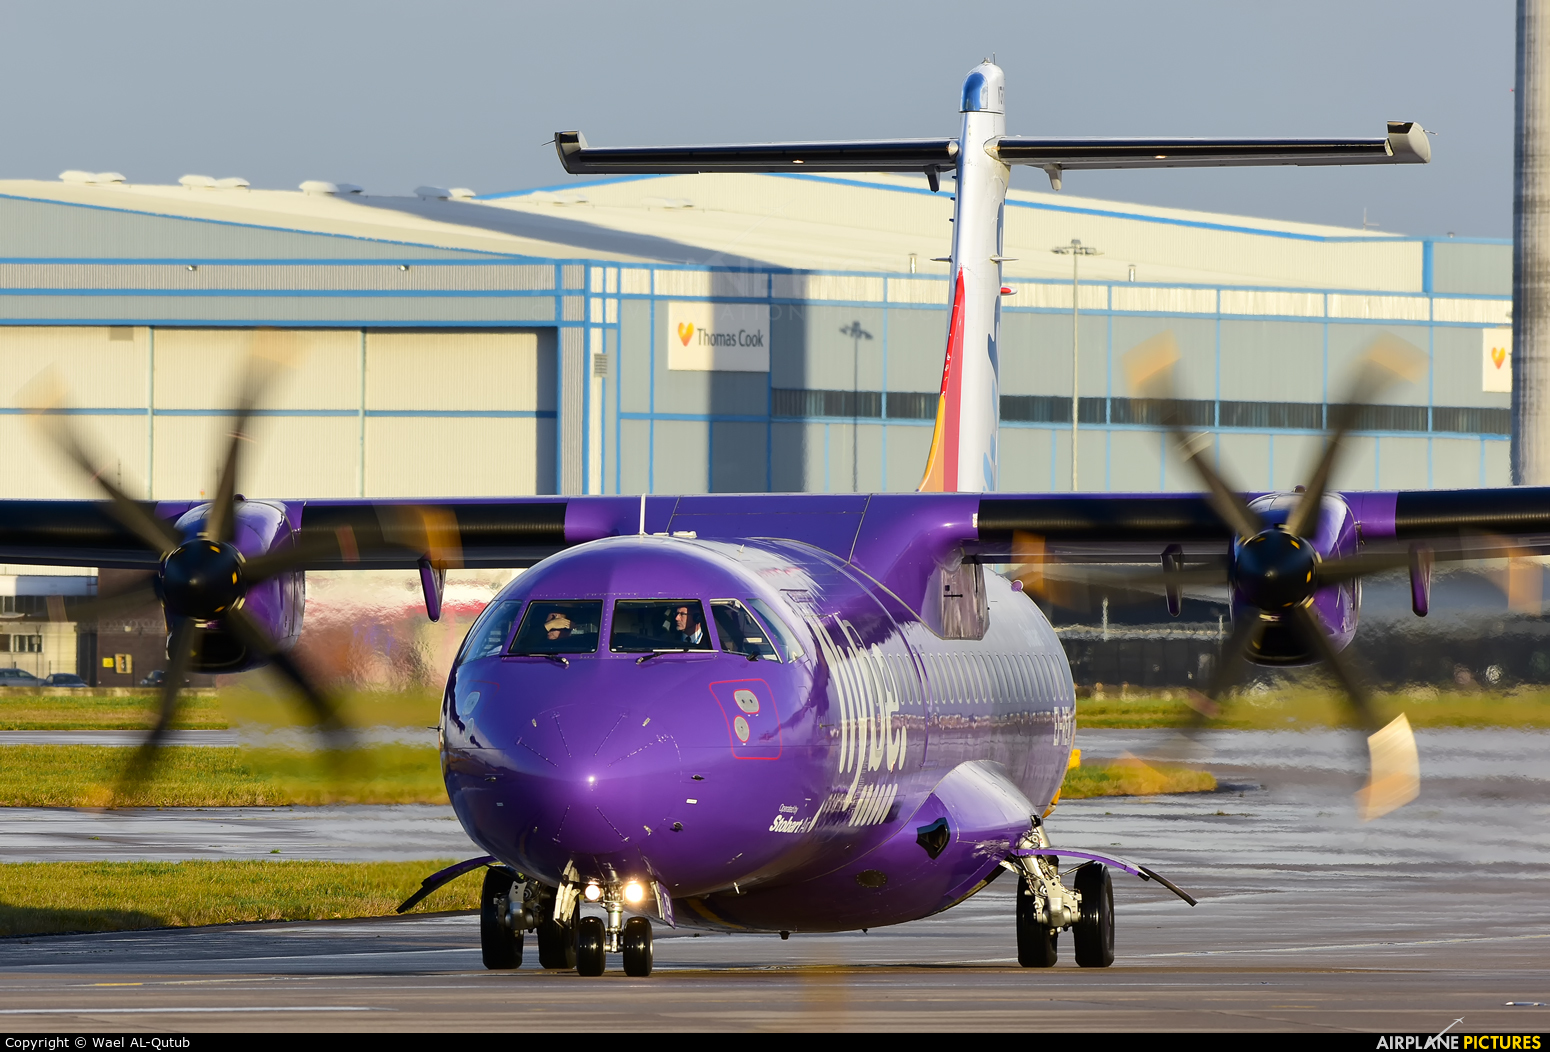 Flybe EI-REM aircraft at Manchester